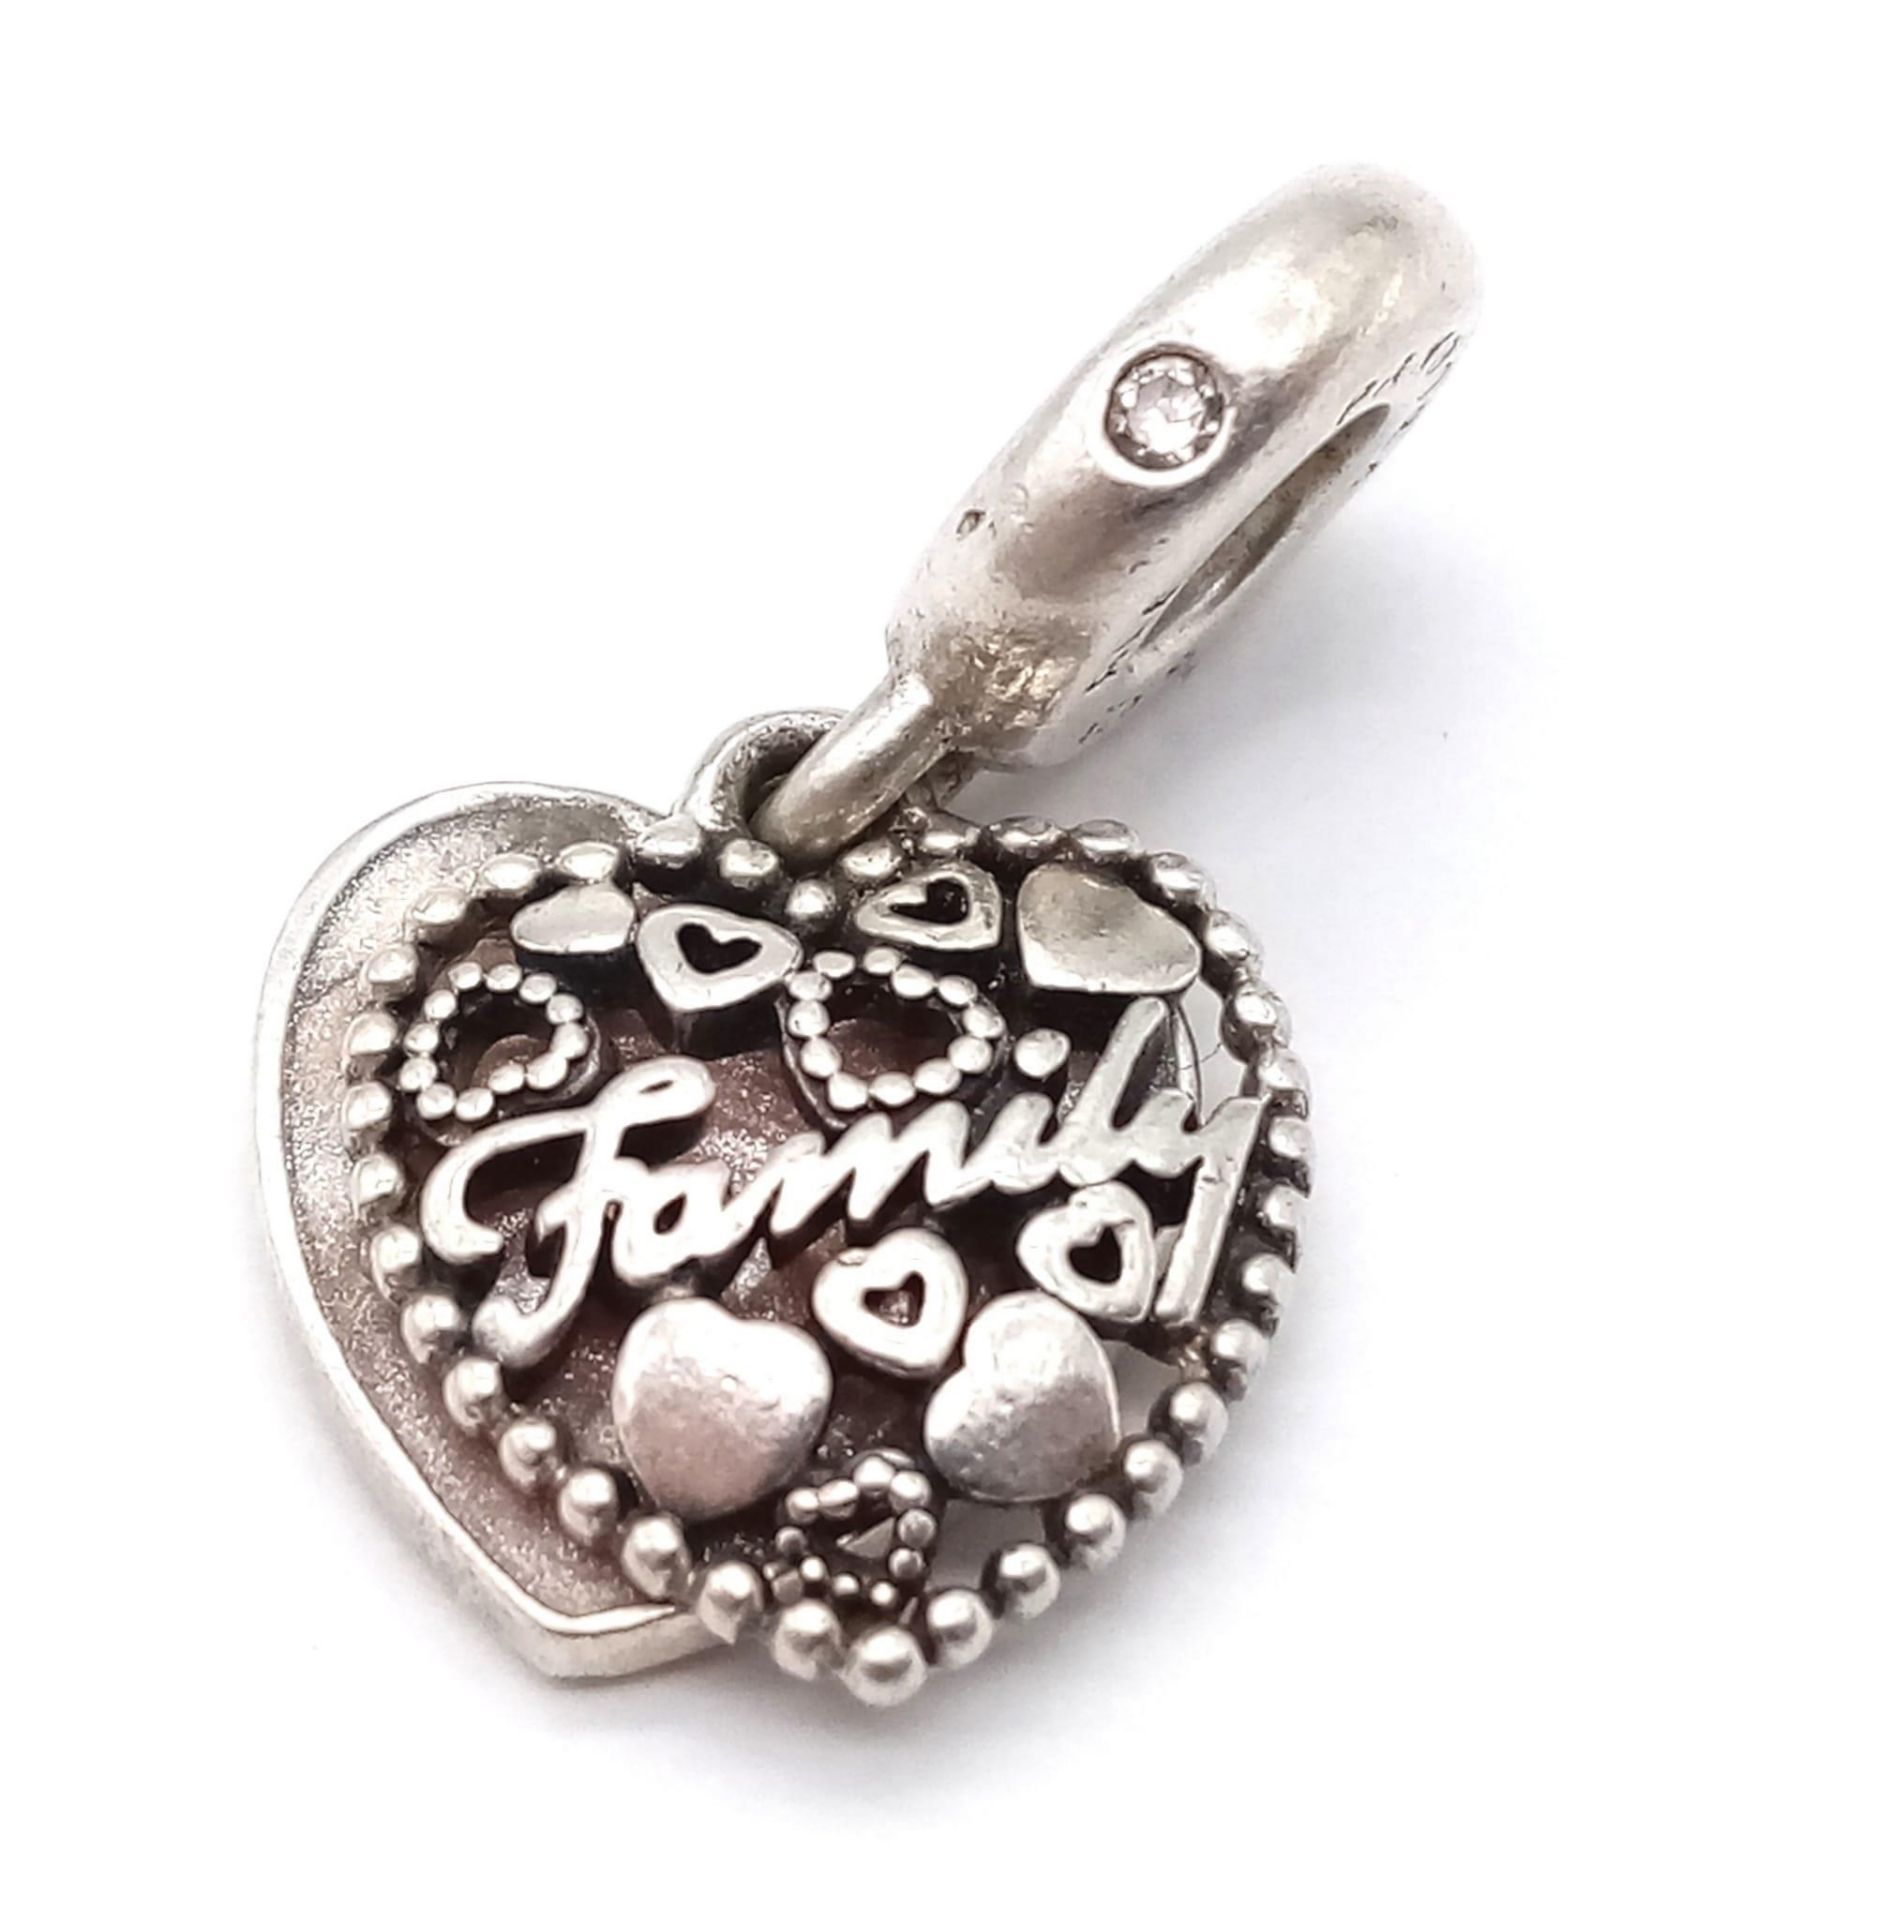 2 x Pandora Sterling Silver Heart Charms - one says 'Family' and the other says 'First My Mother, - Image 5 of 7